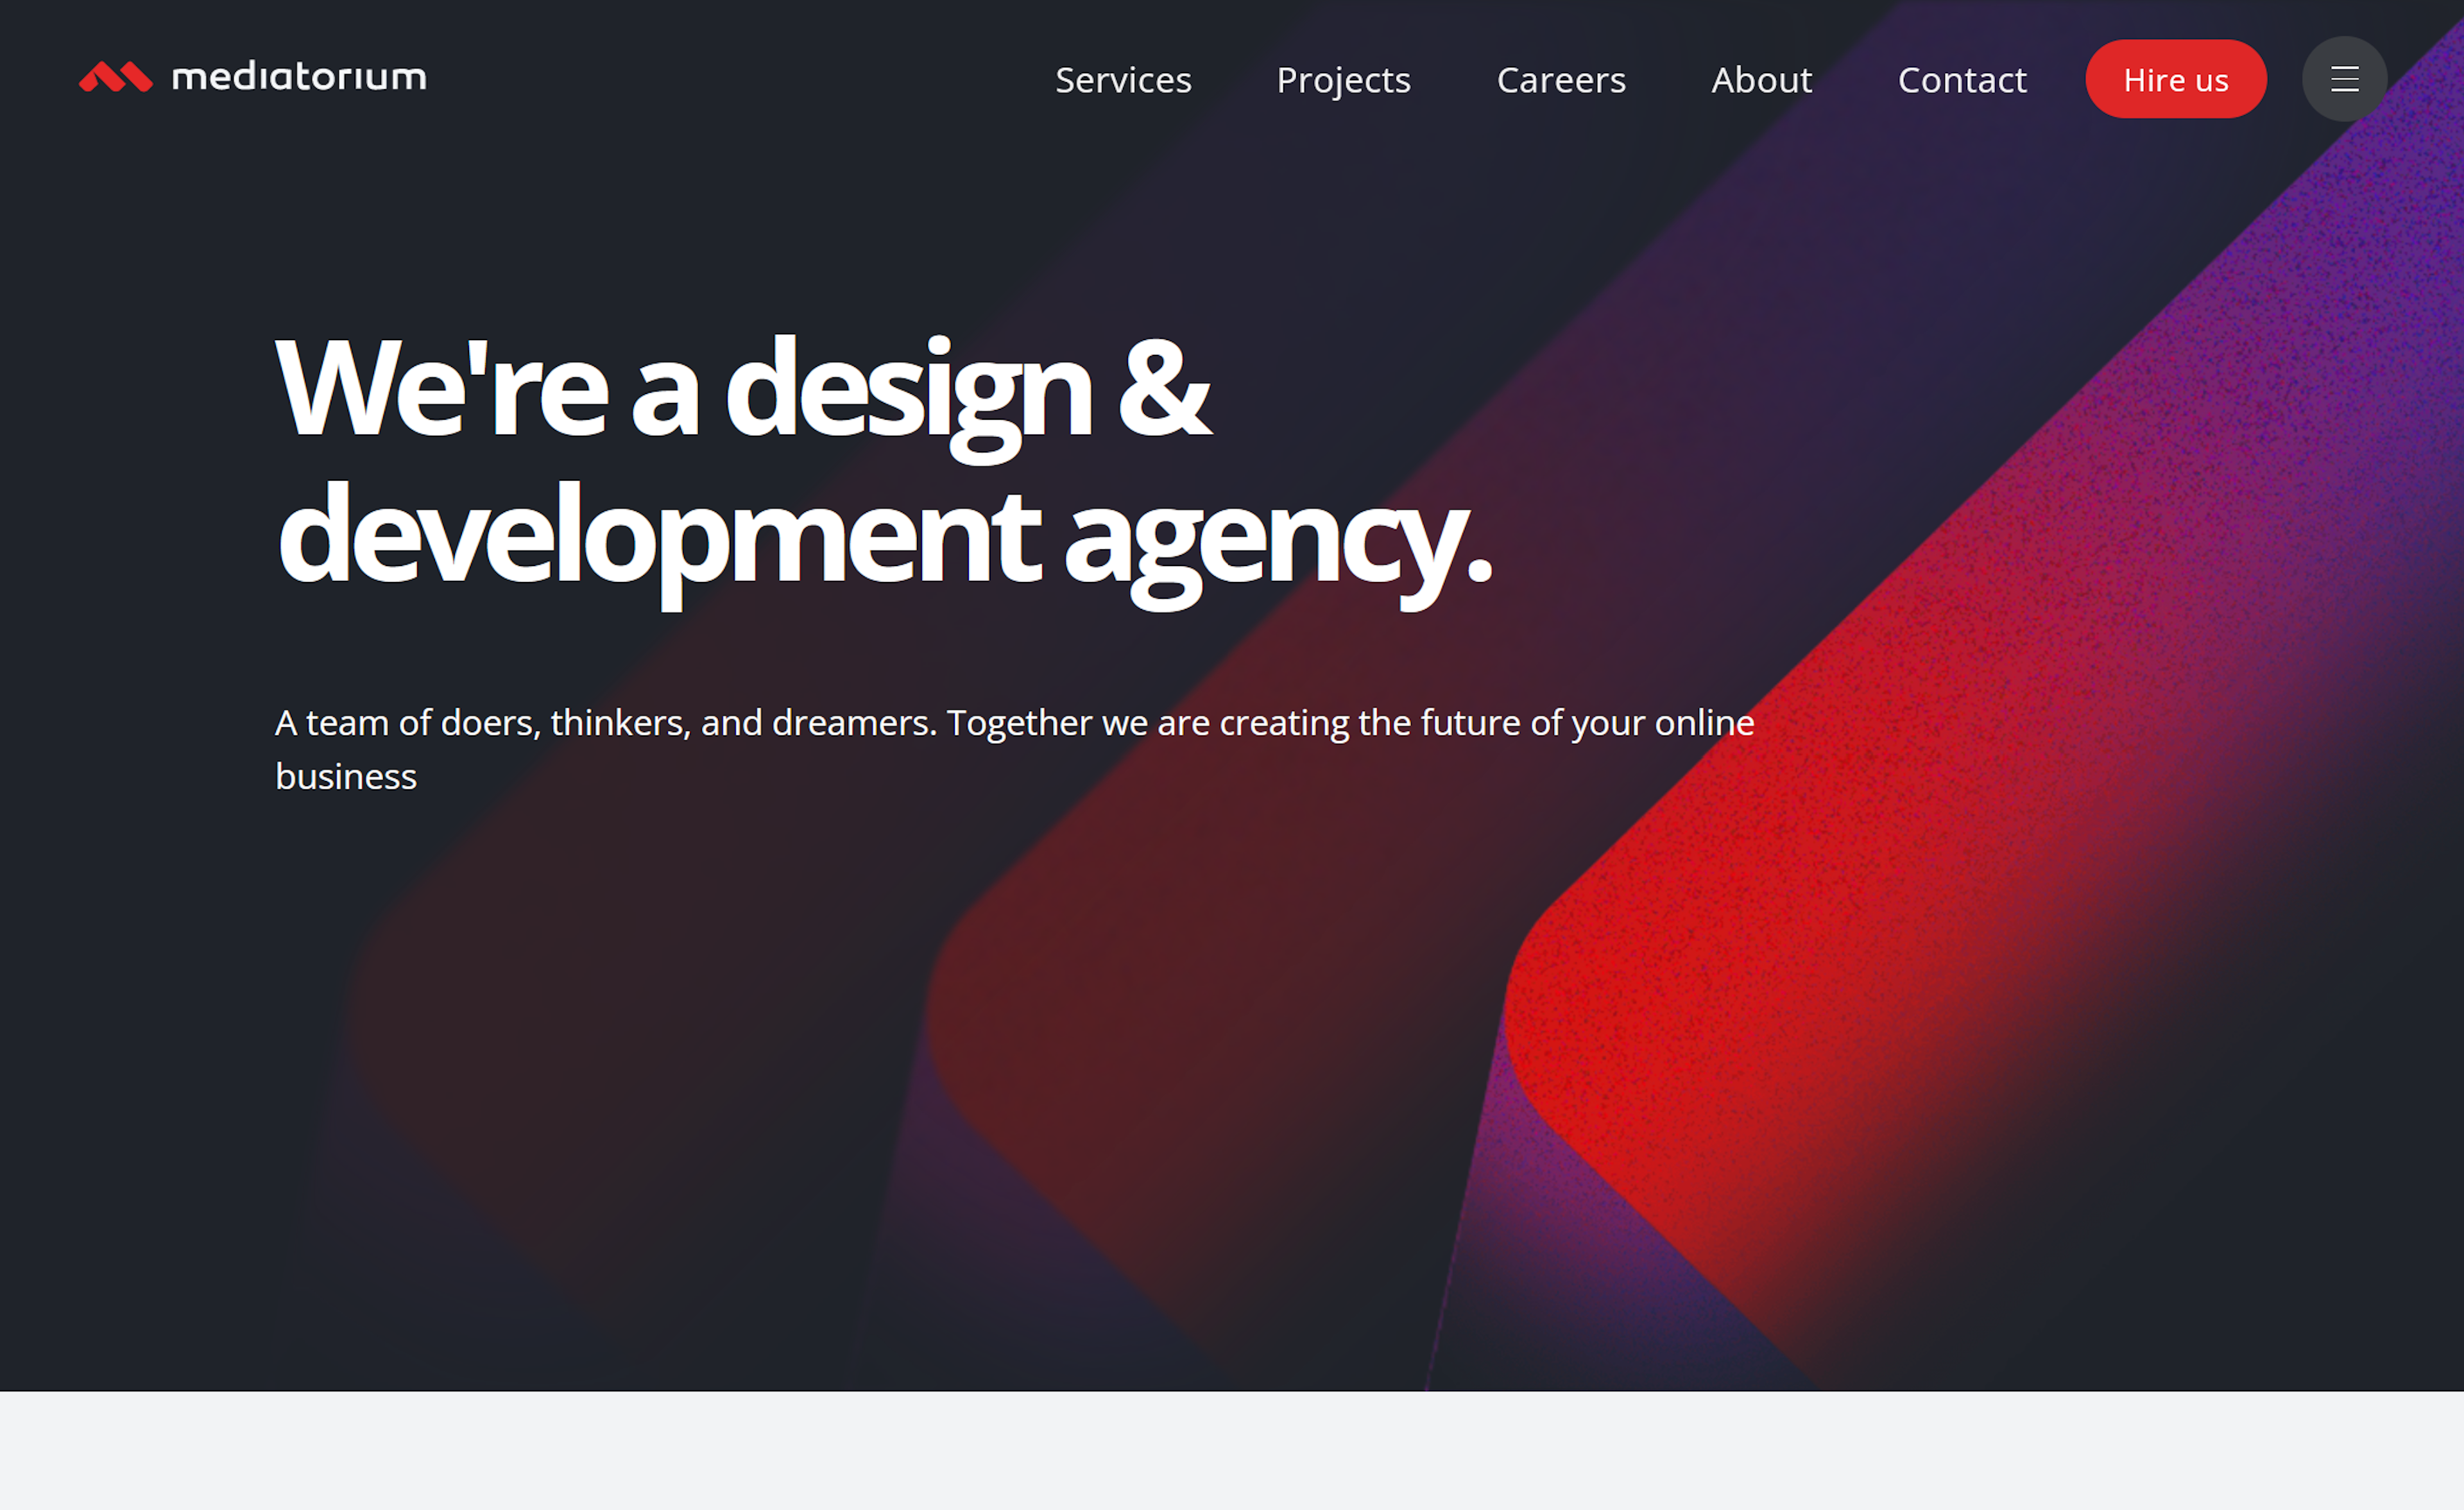 Frontend development for a design and development agency. A sleek and modern interface showcasing creativity and expertise.